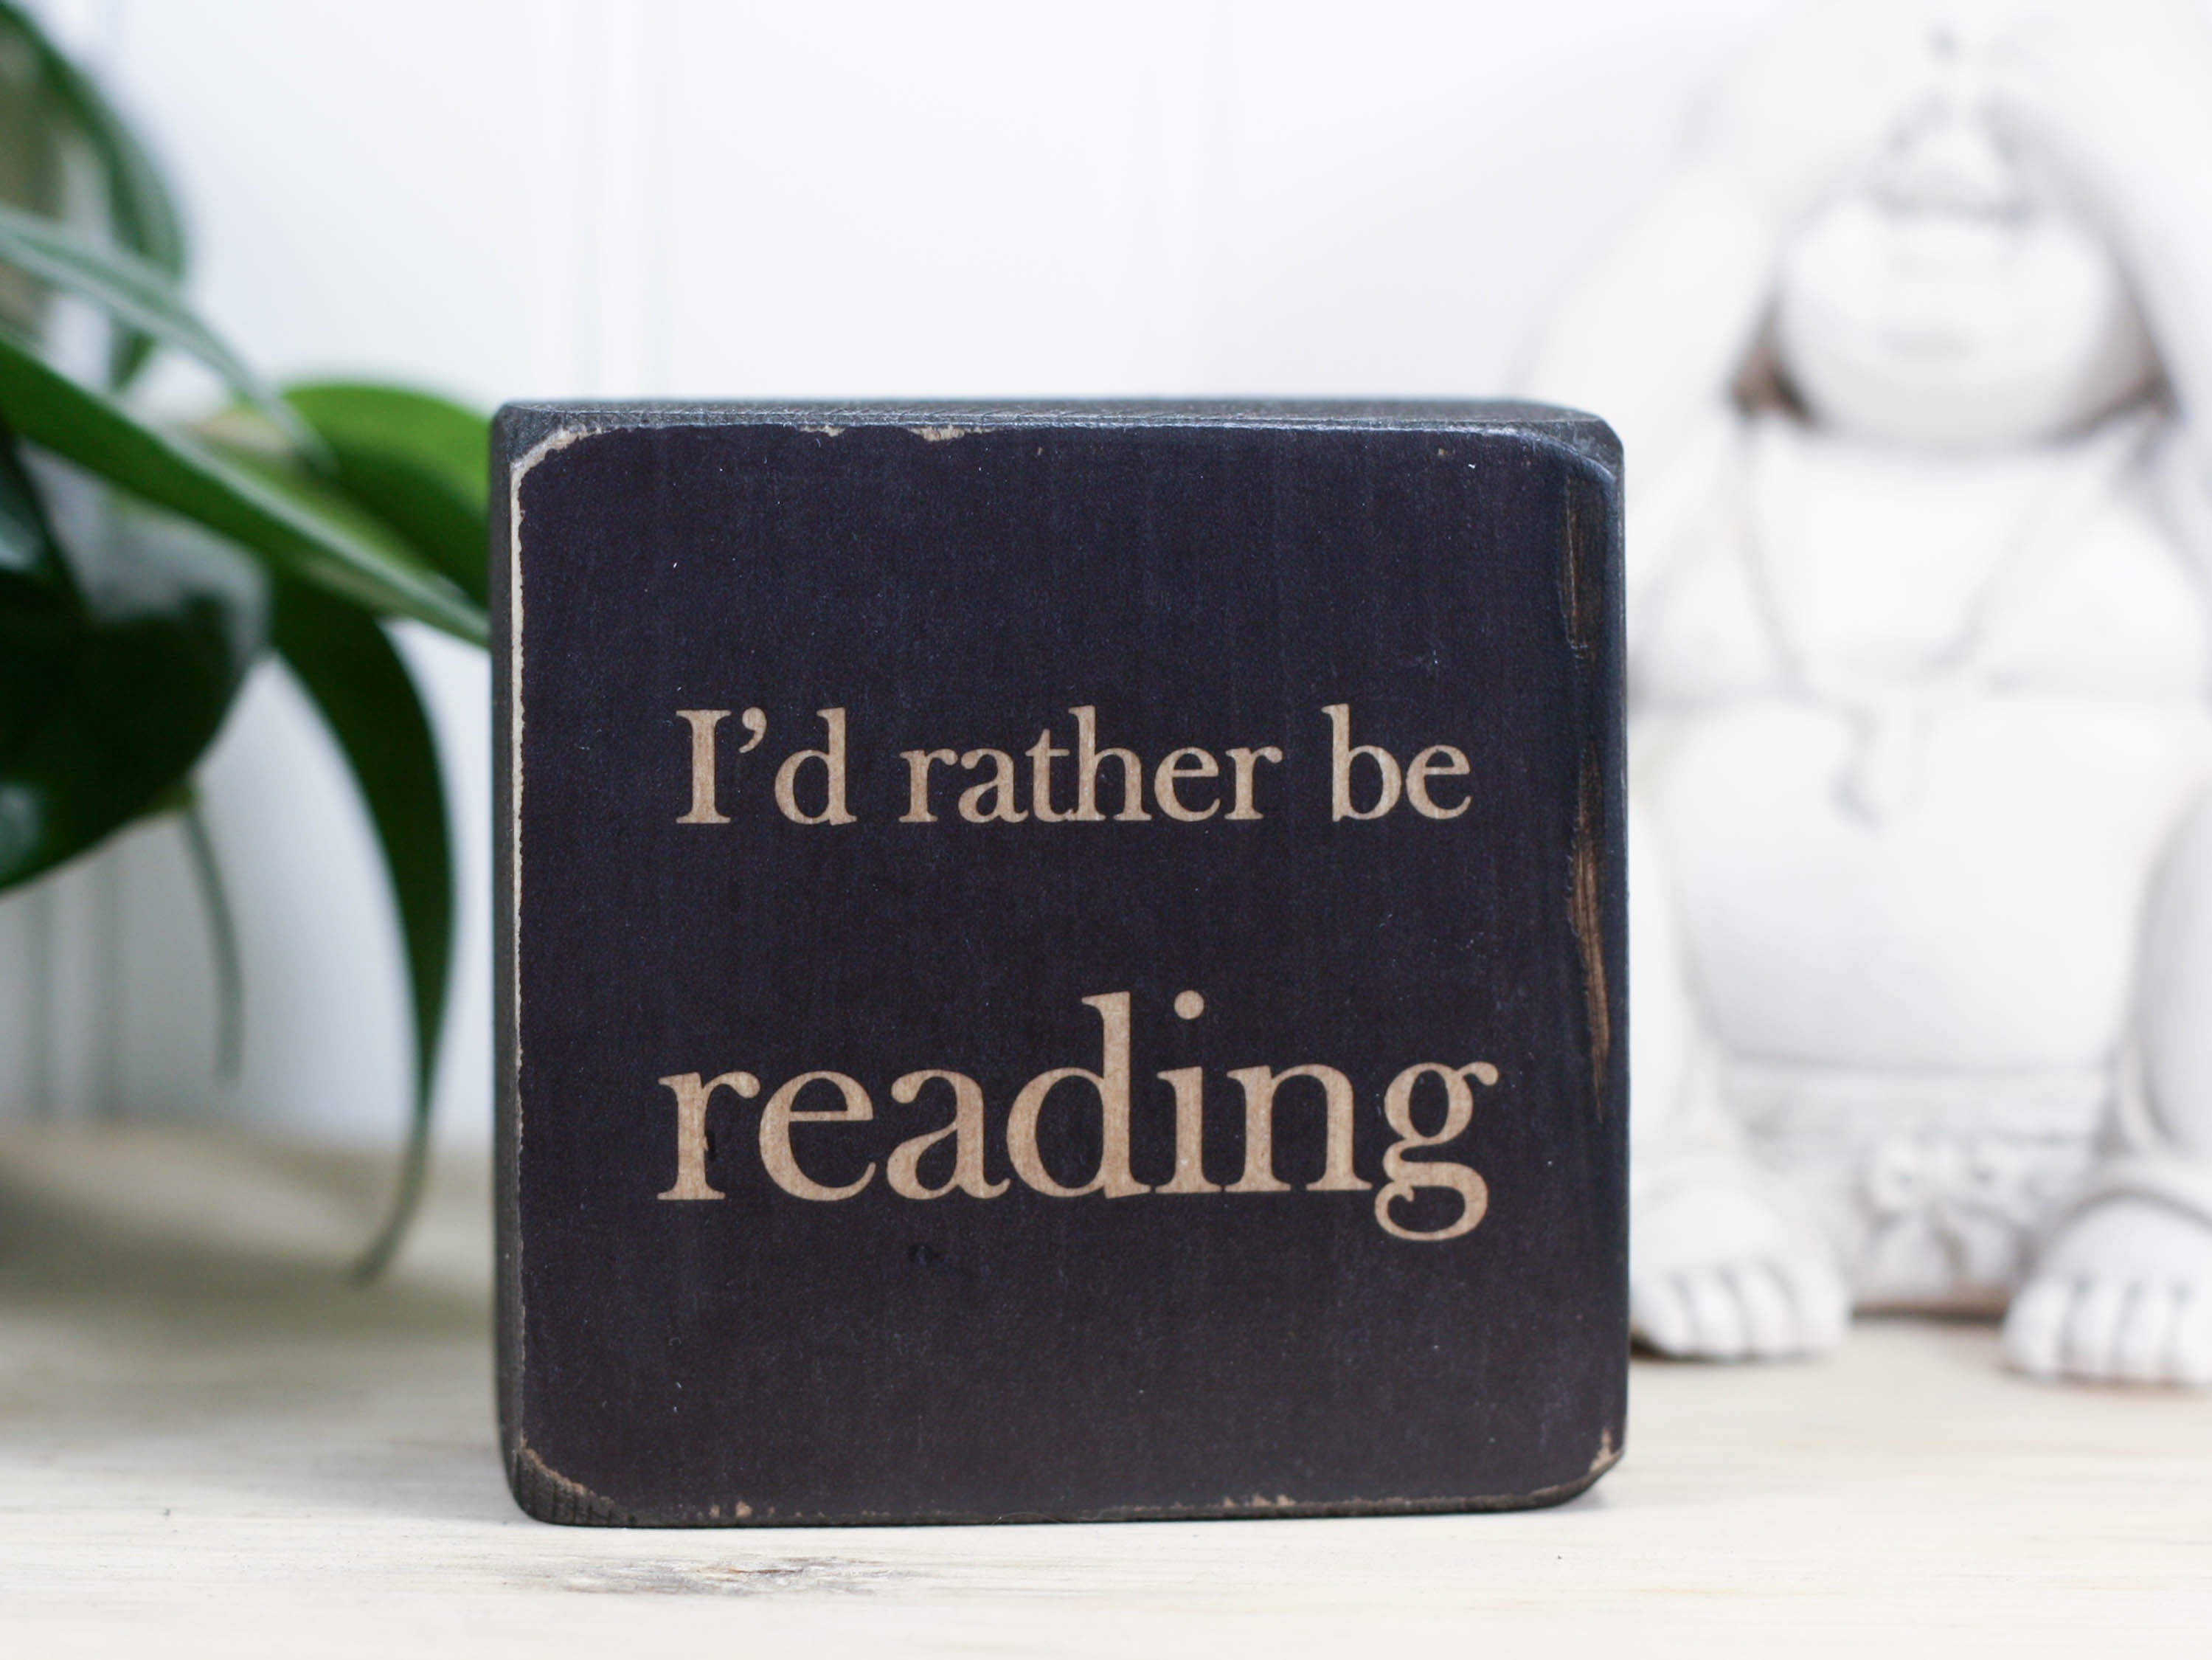 Mini wood sign in distressed black with the saying "I'd rather be reading".